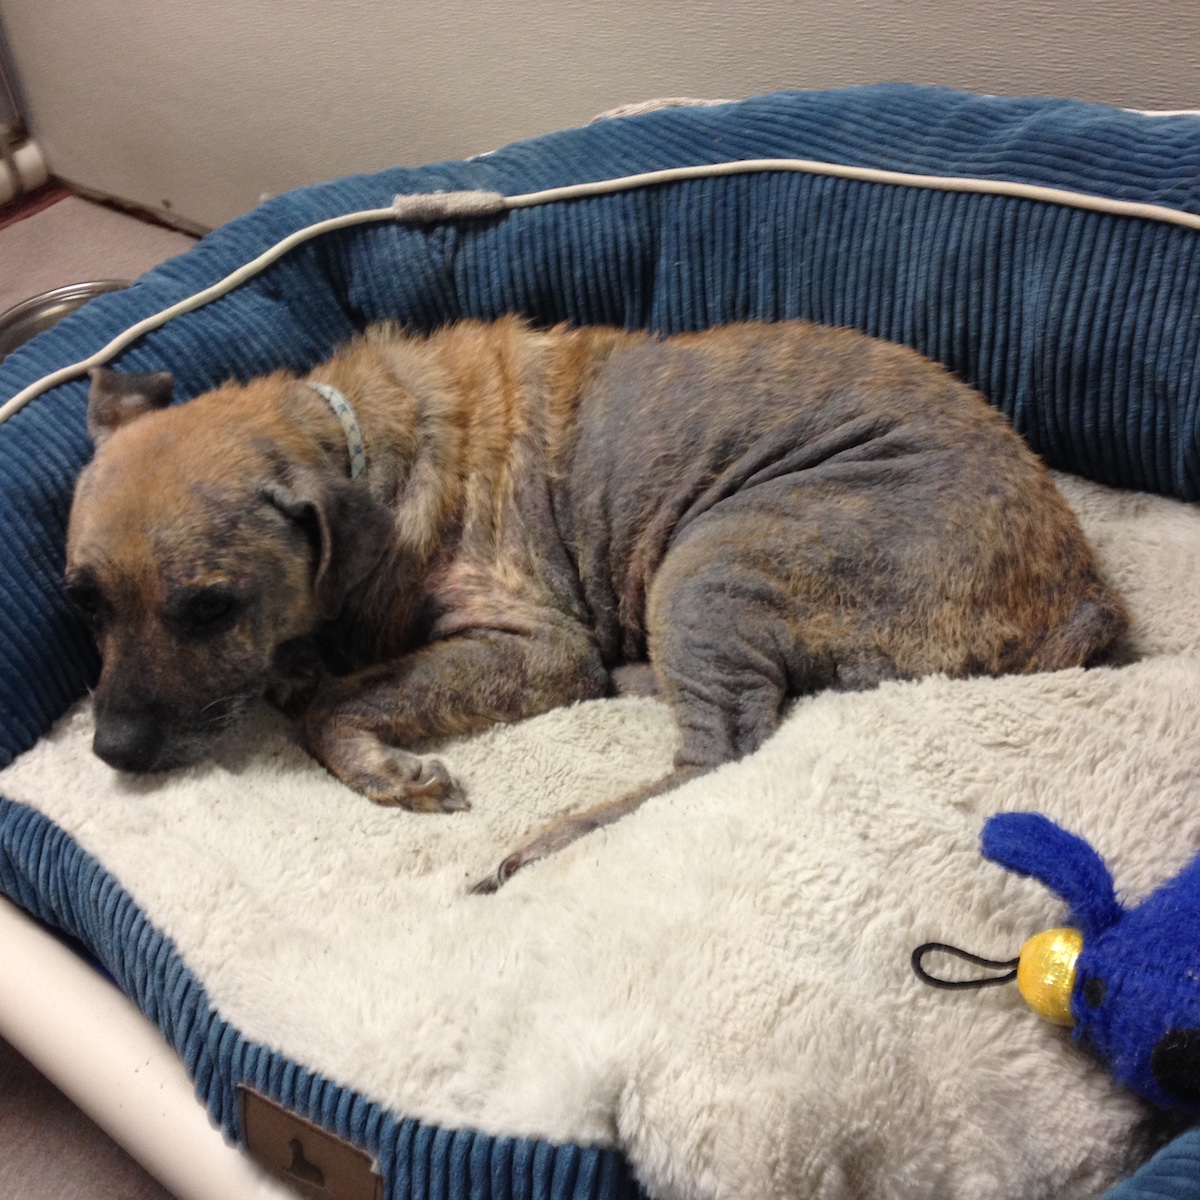 A small terrier mix afflicted by mange sleeps on a dog bed in an animal shelter